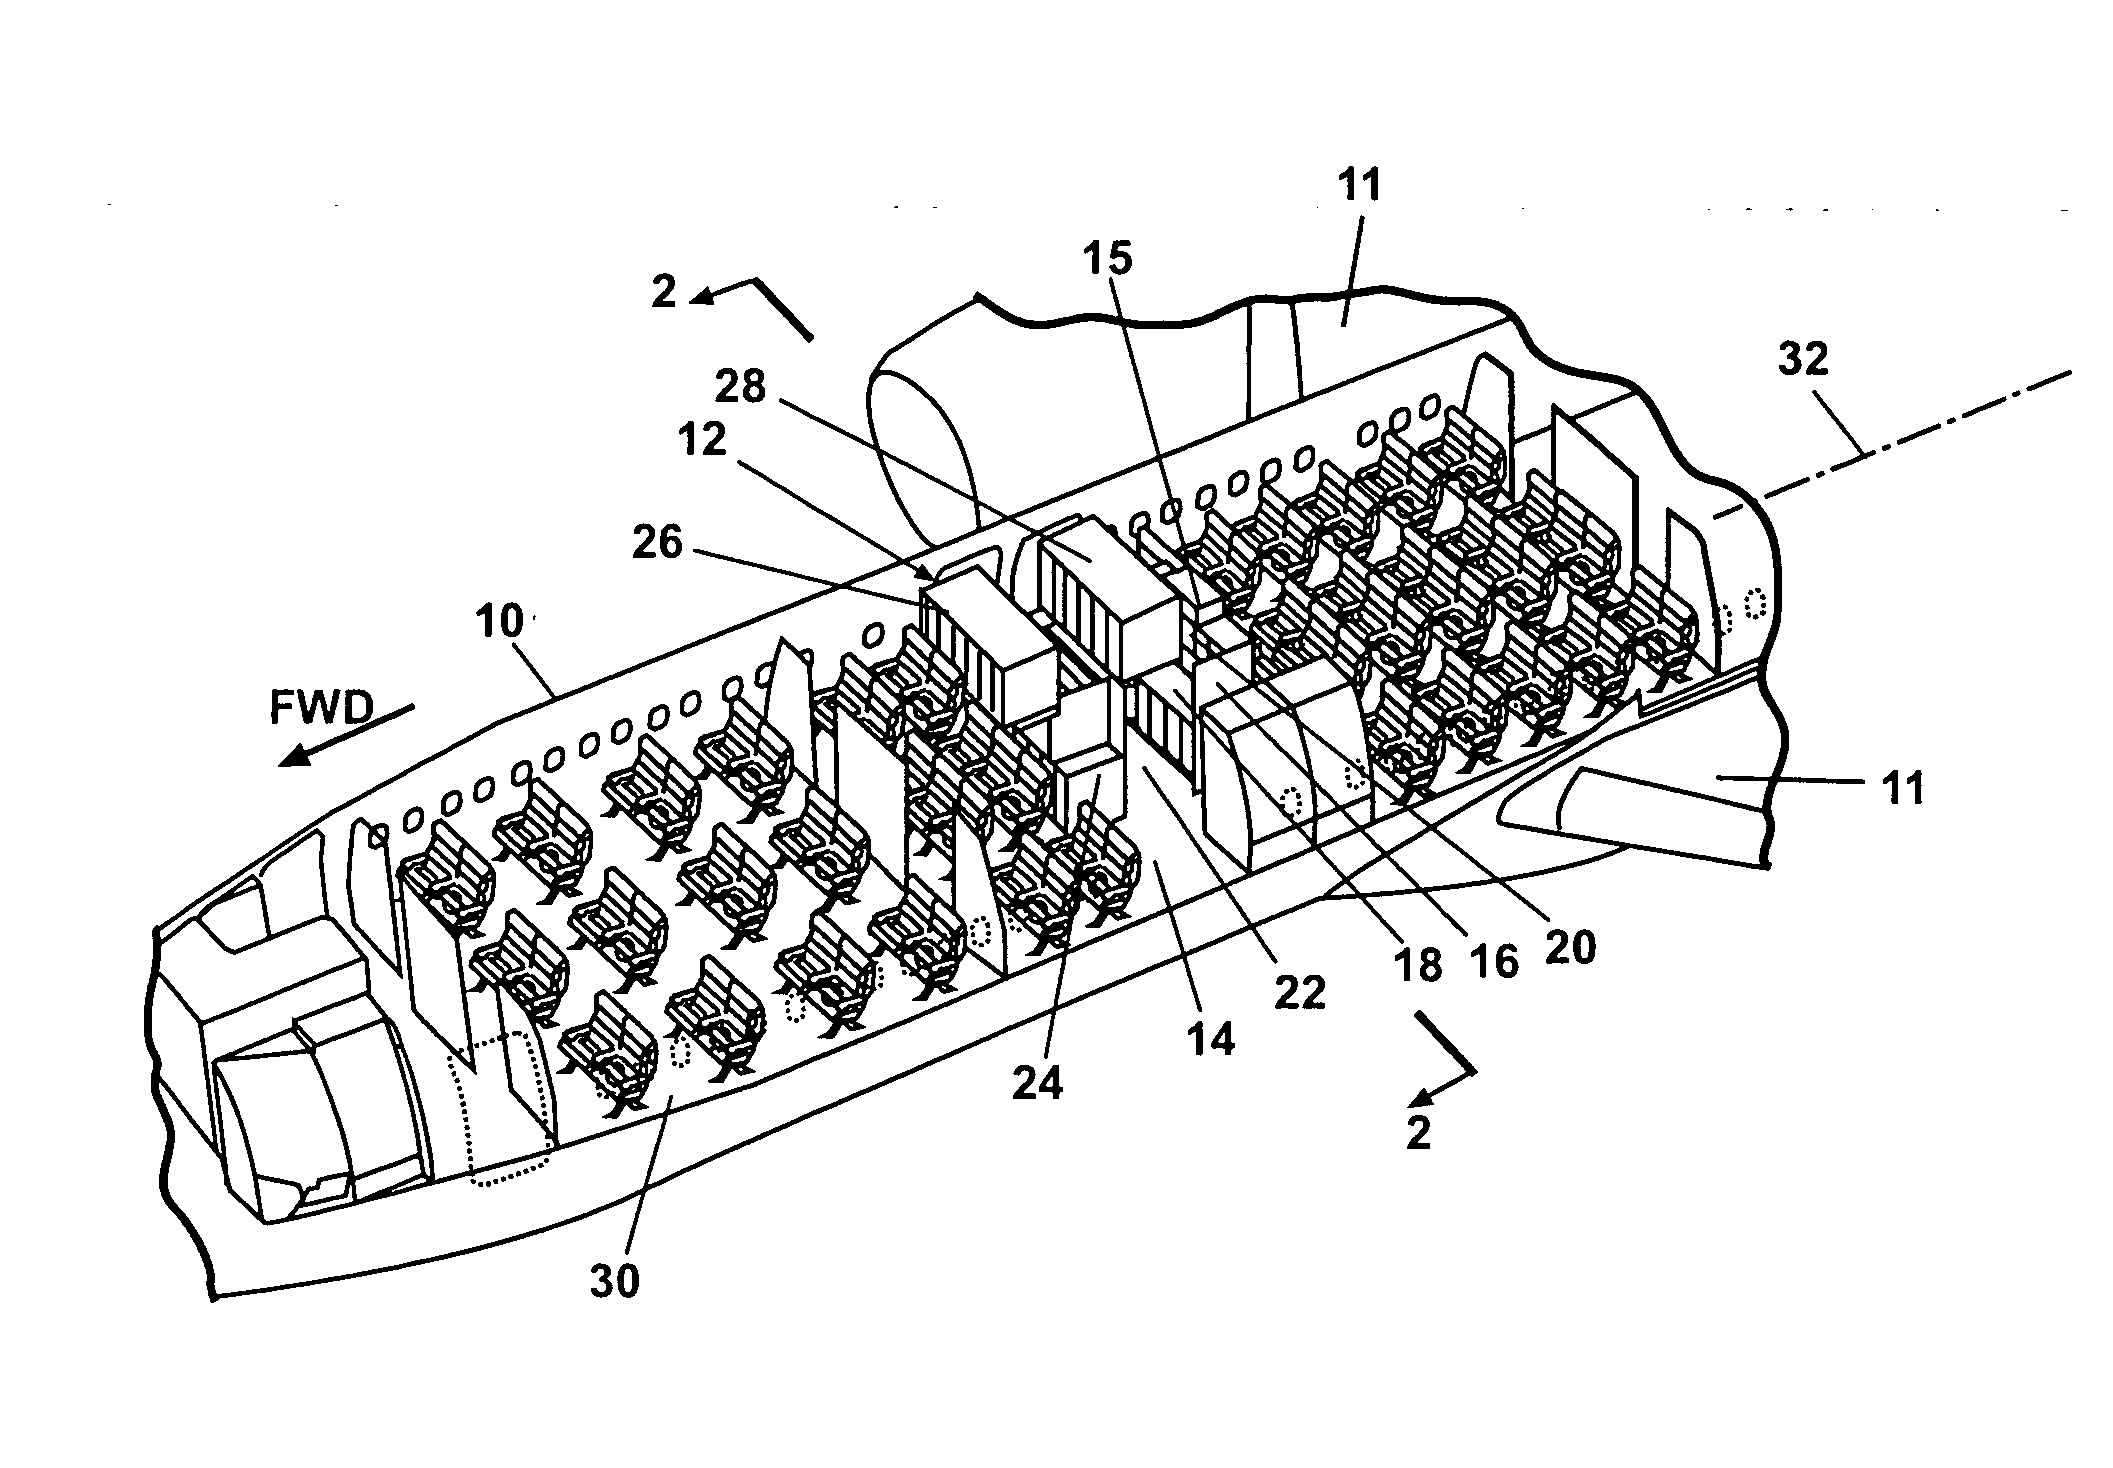 Galley cart storage system and method of use